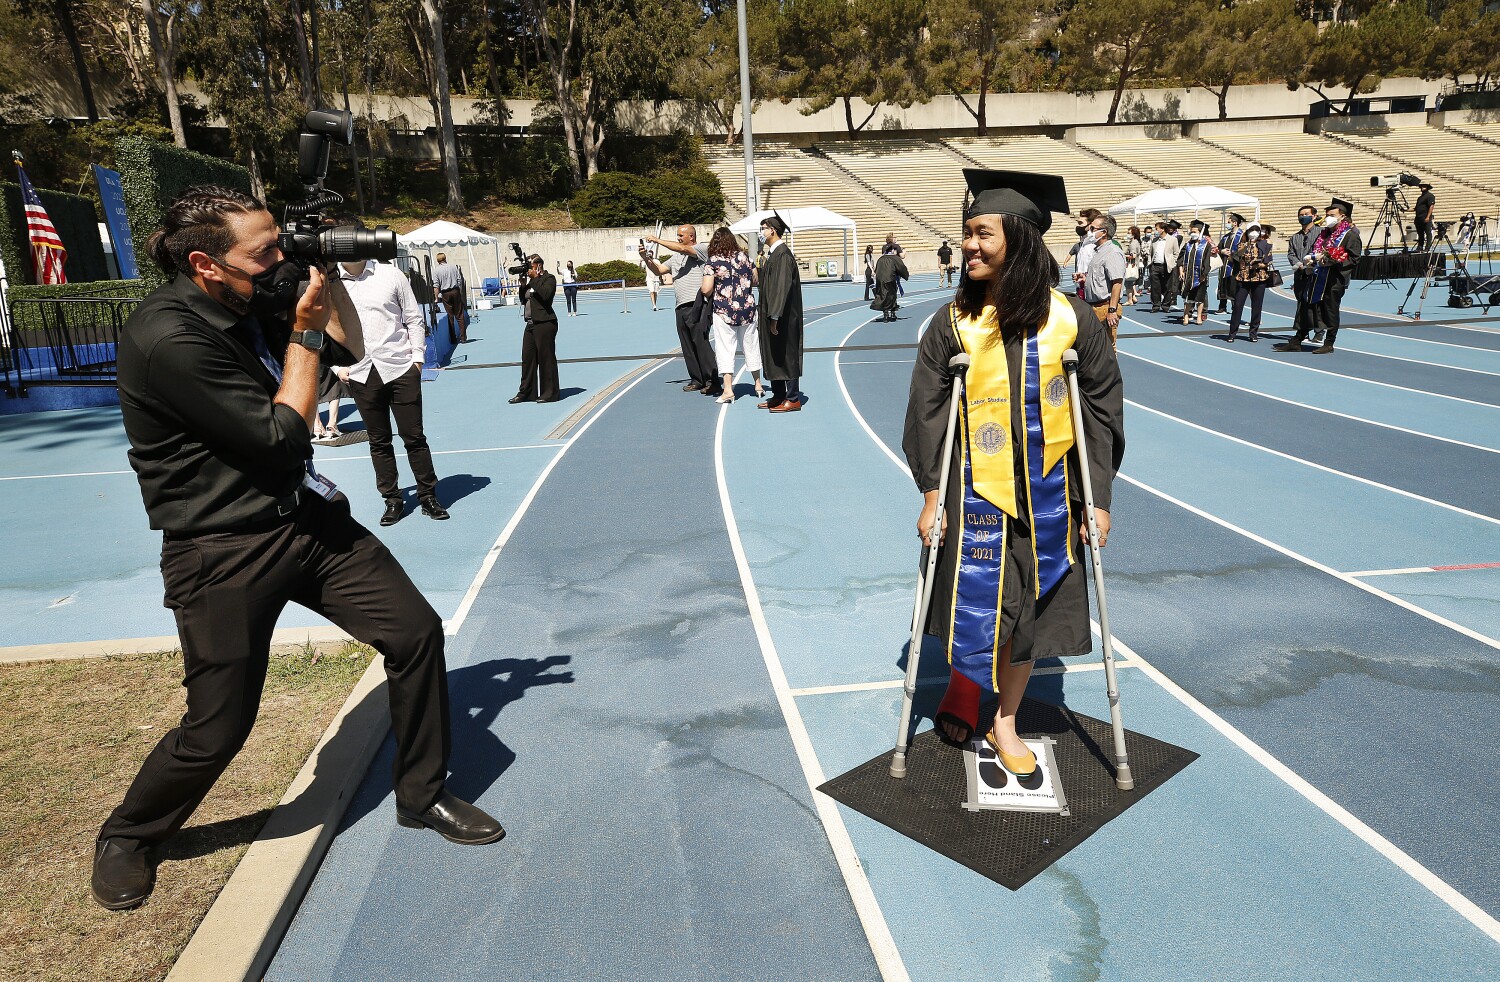 In this COVID-19 year, UCLA students return to campus for graduation